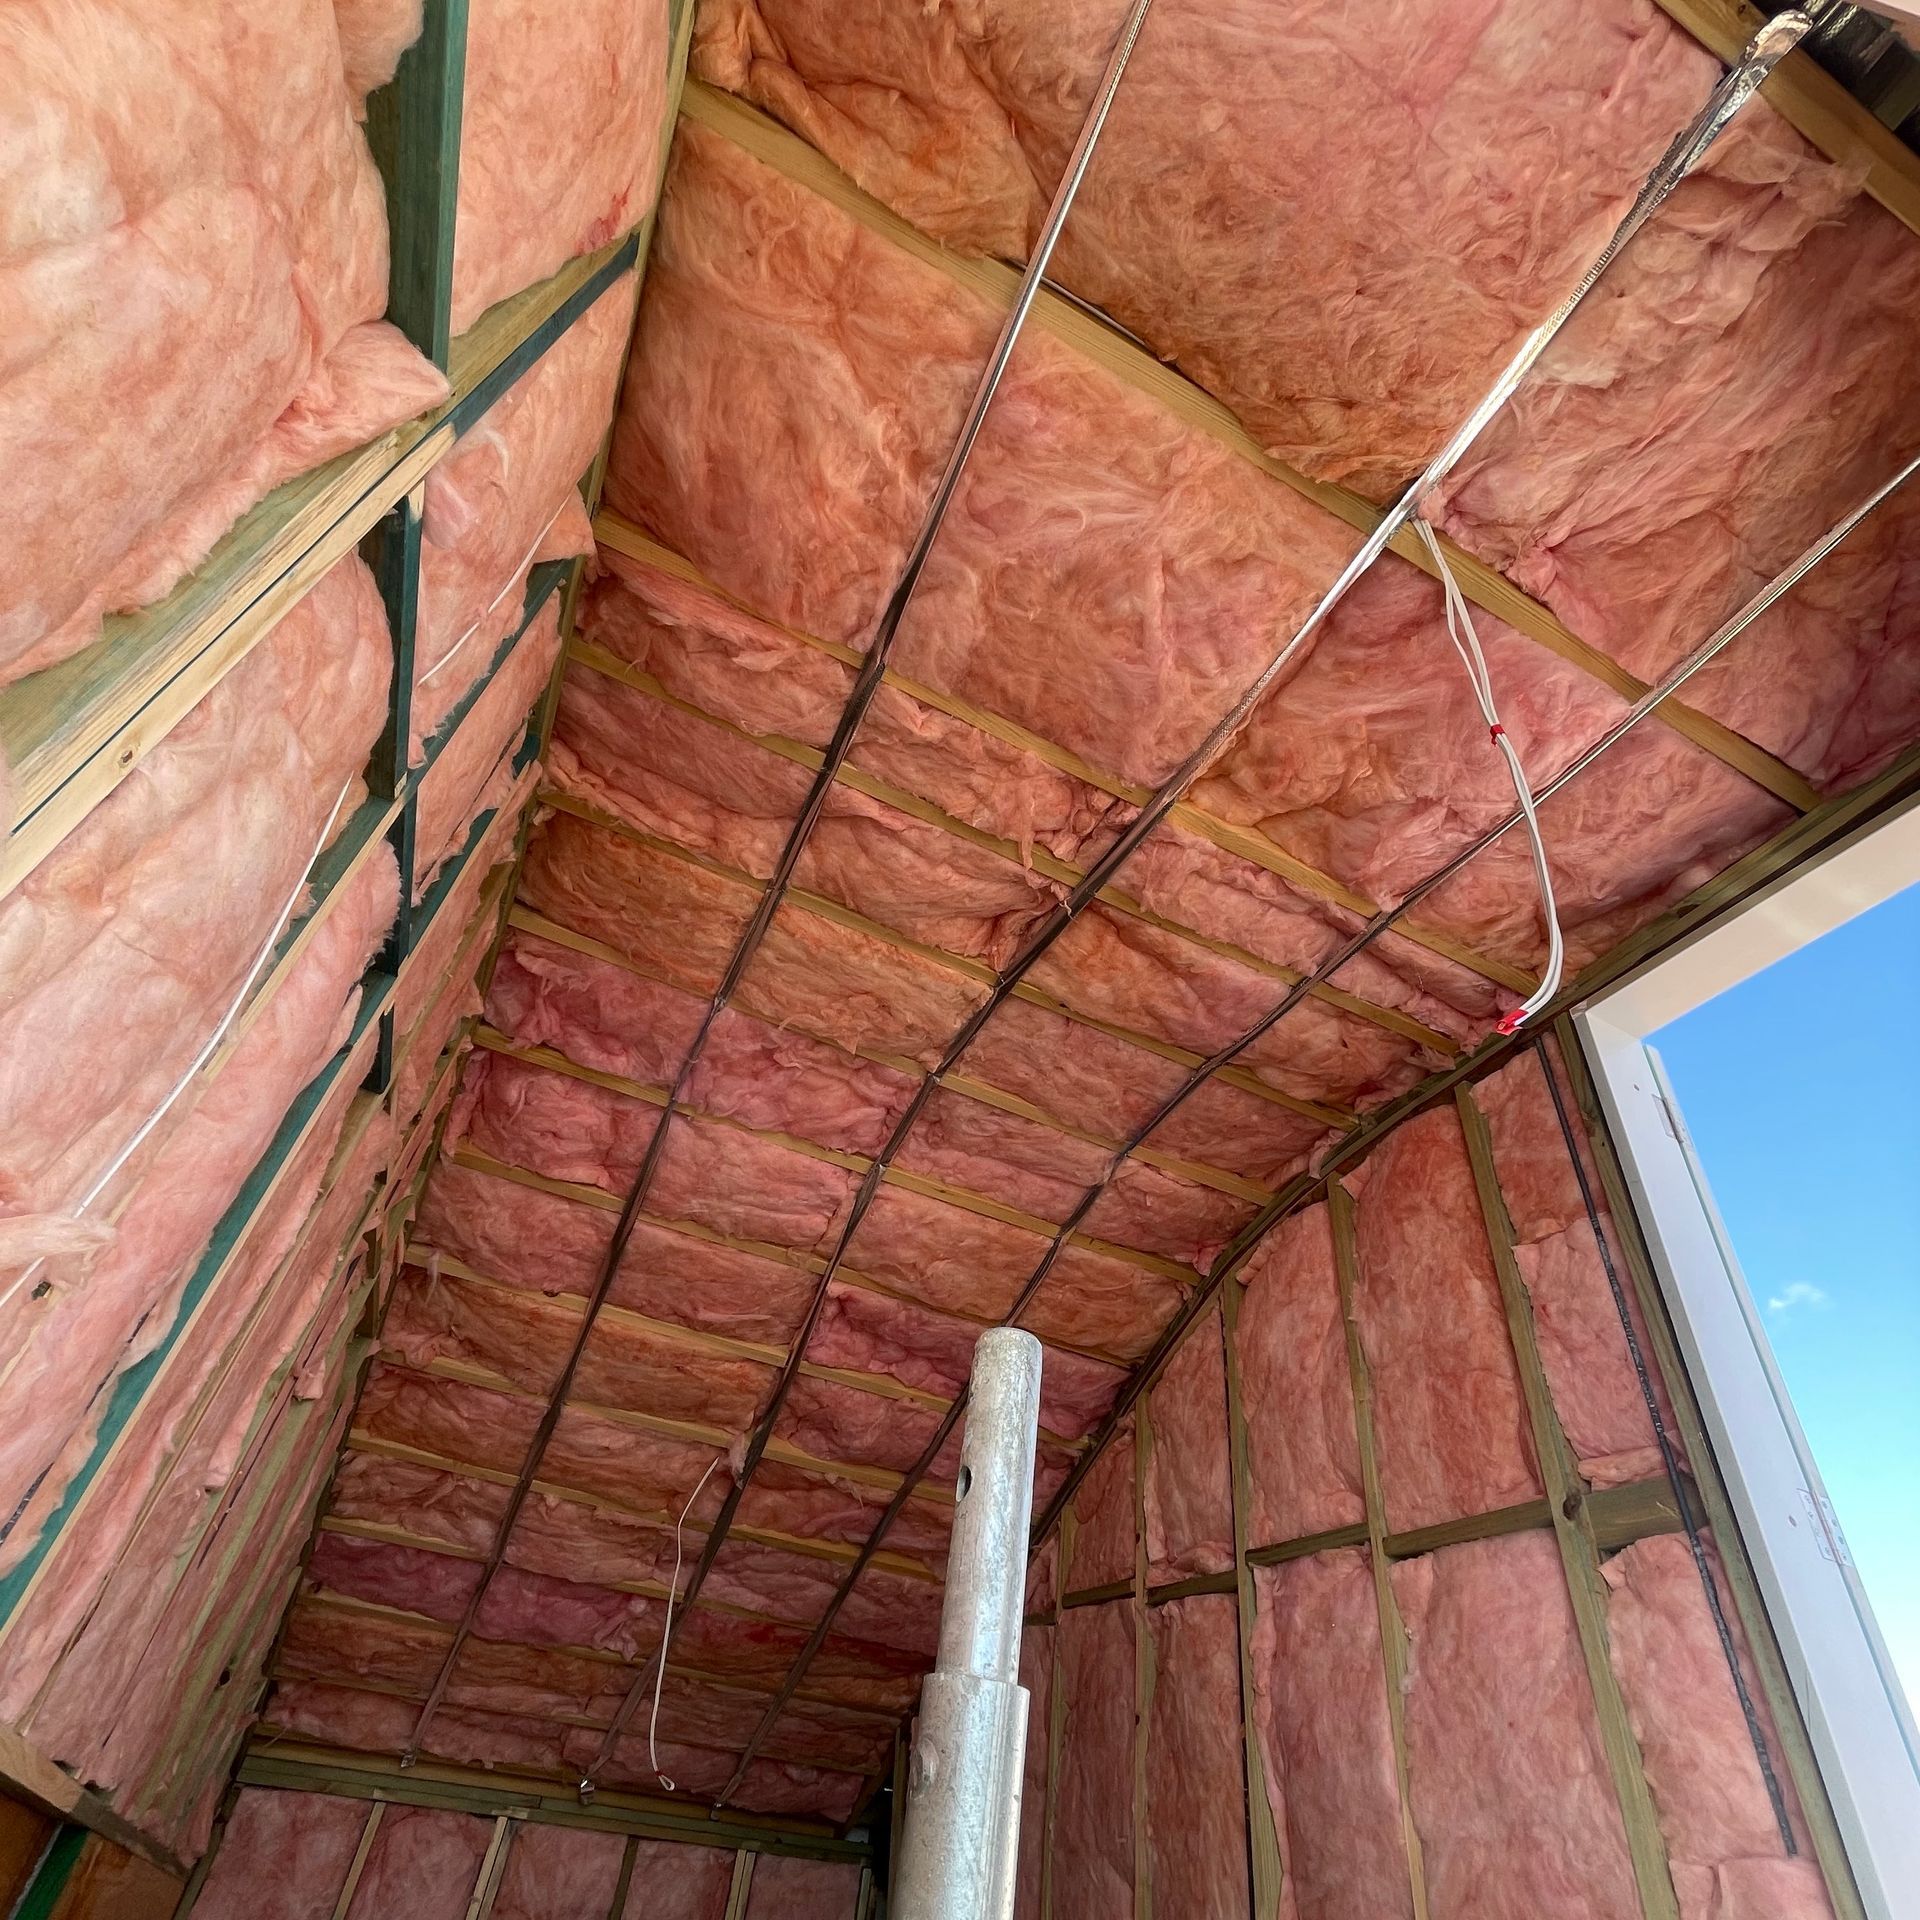 Insulation in Roof